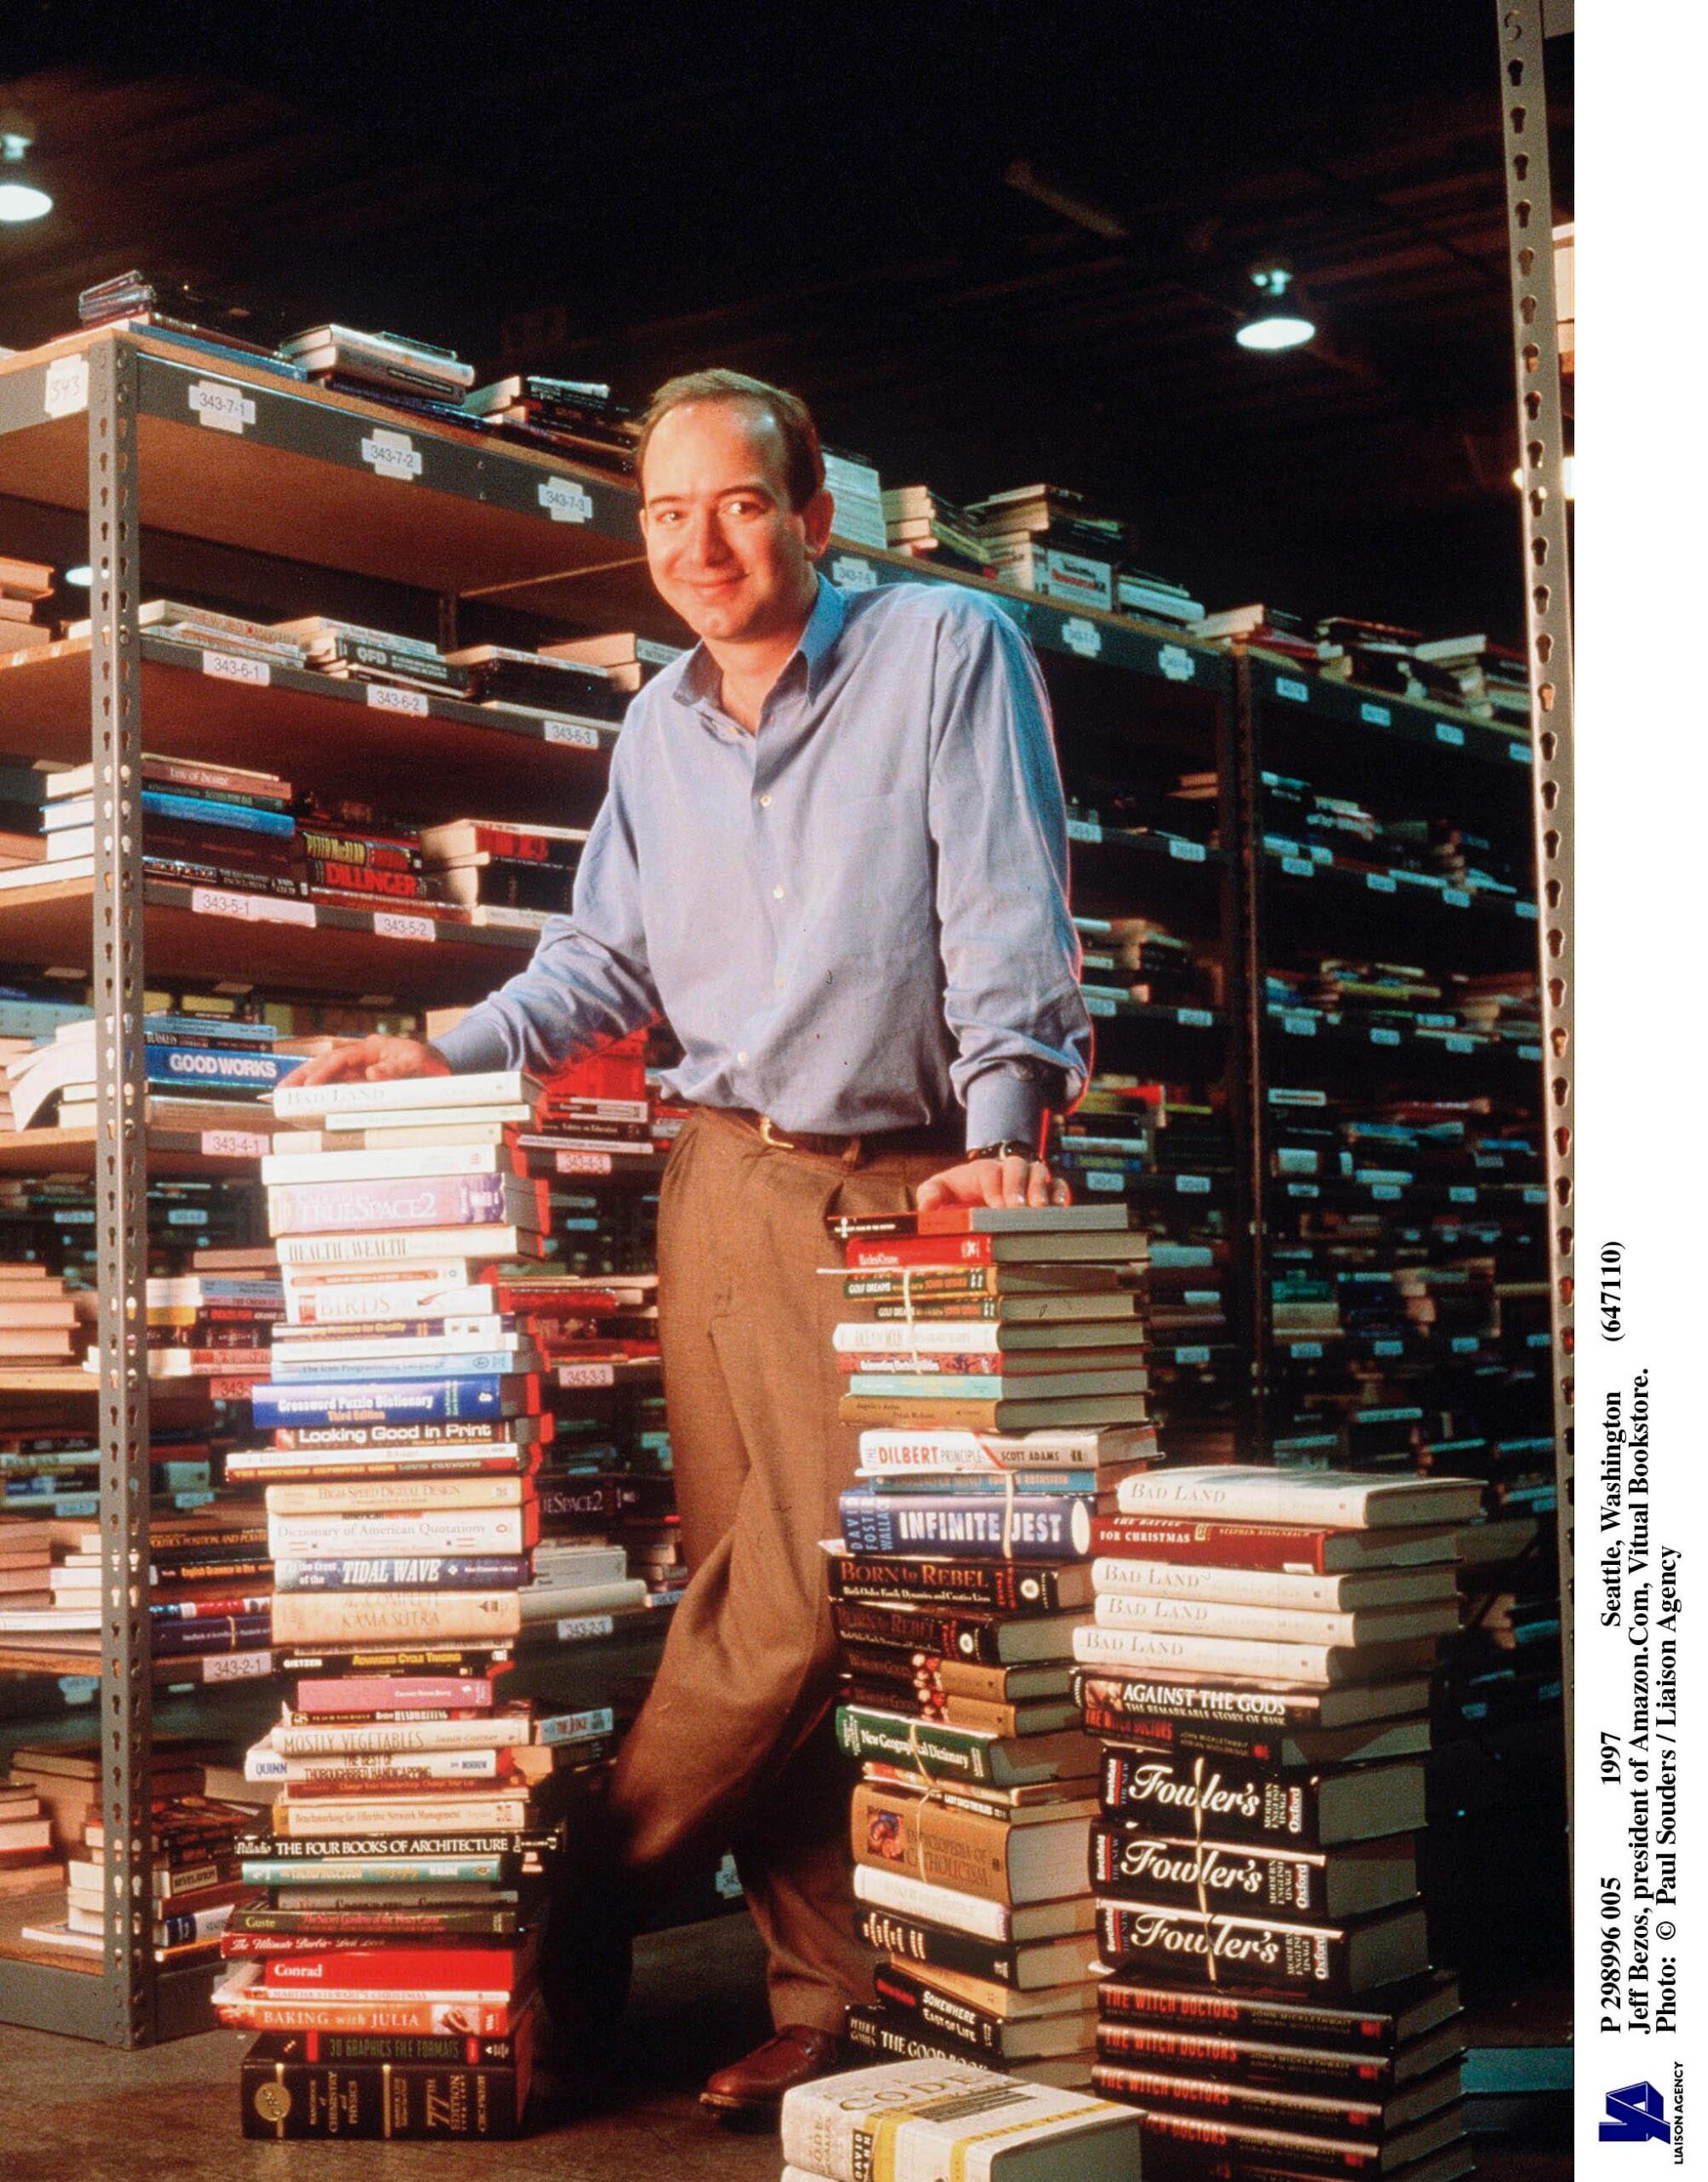 Jeff Bezos stood whilst leaning on two stacks of books